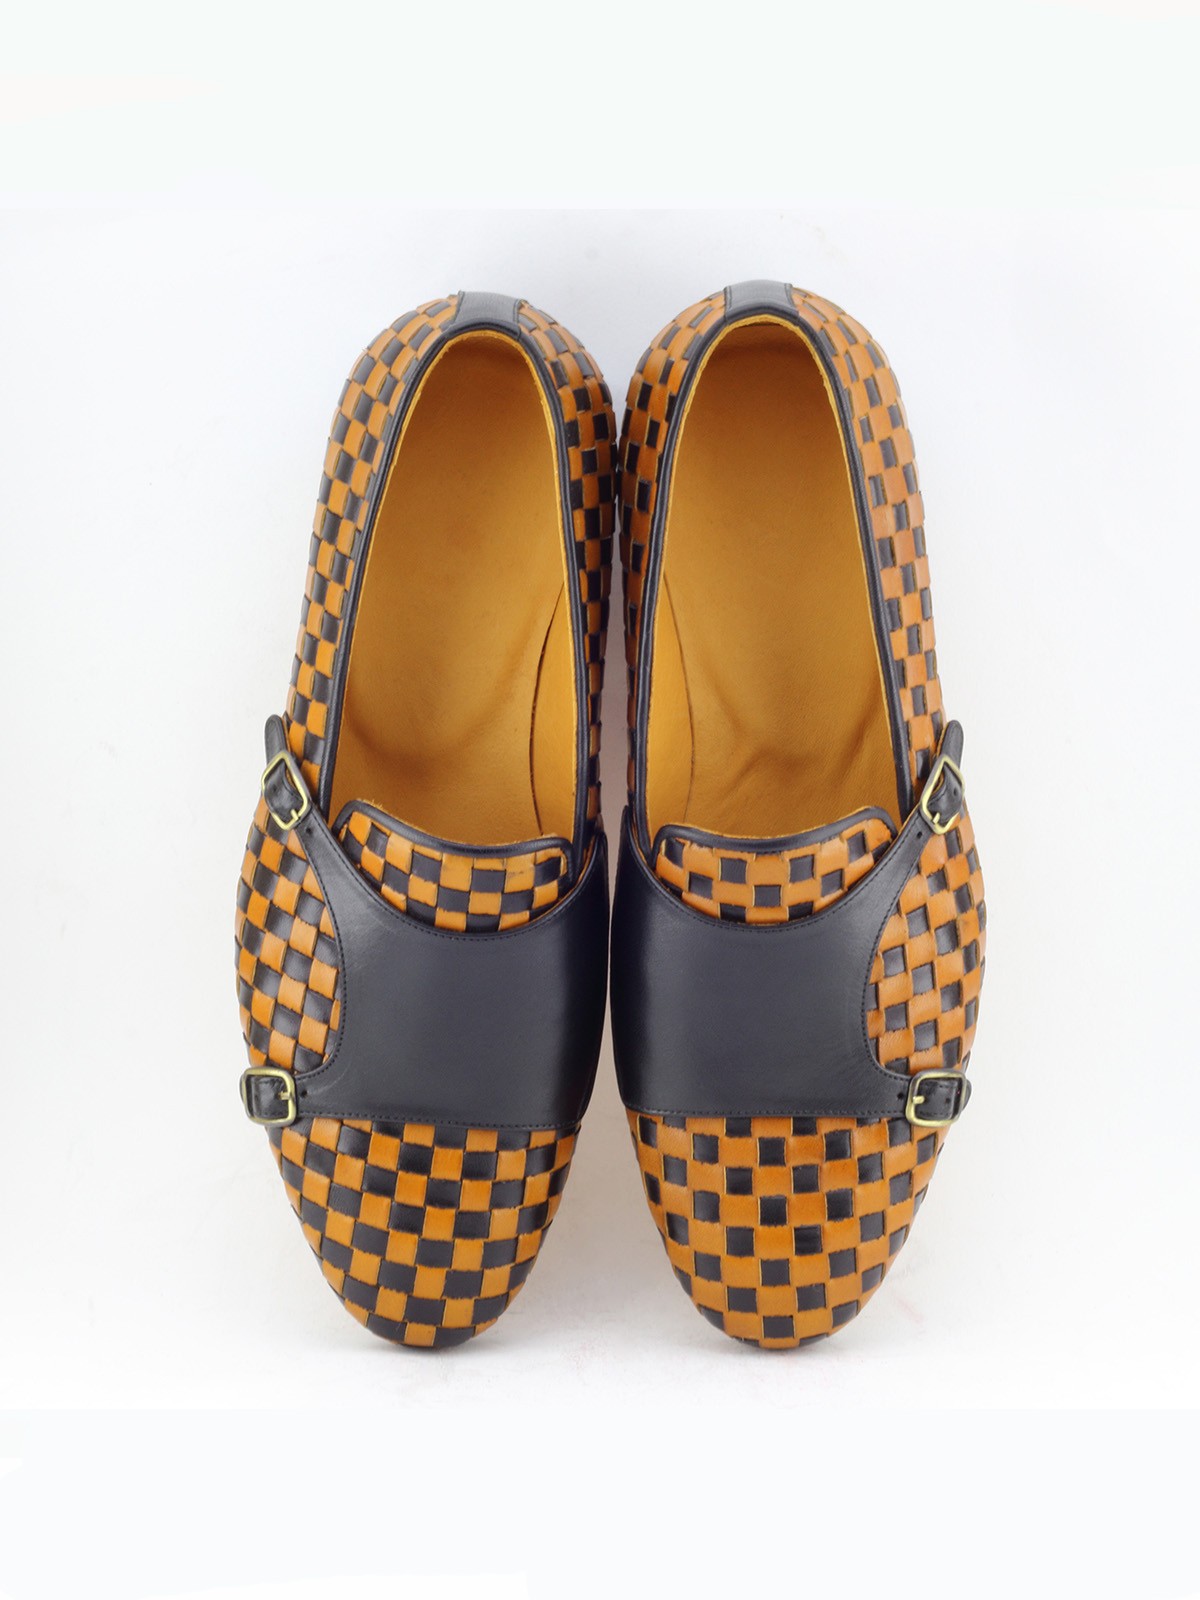 Yellow Handmade Calf Leather Bespoke Shoes by Gentwith.com with Free Shipping